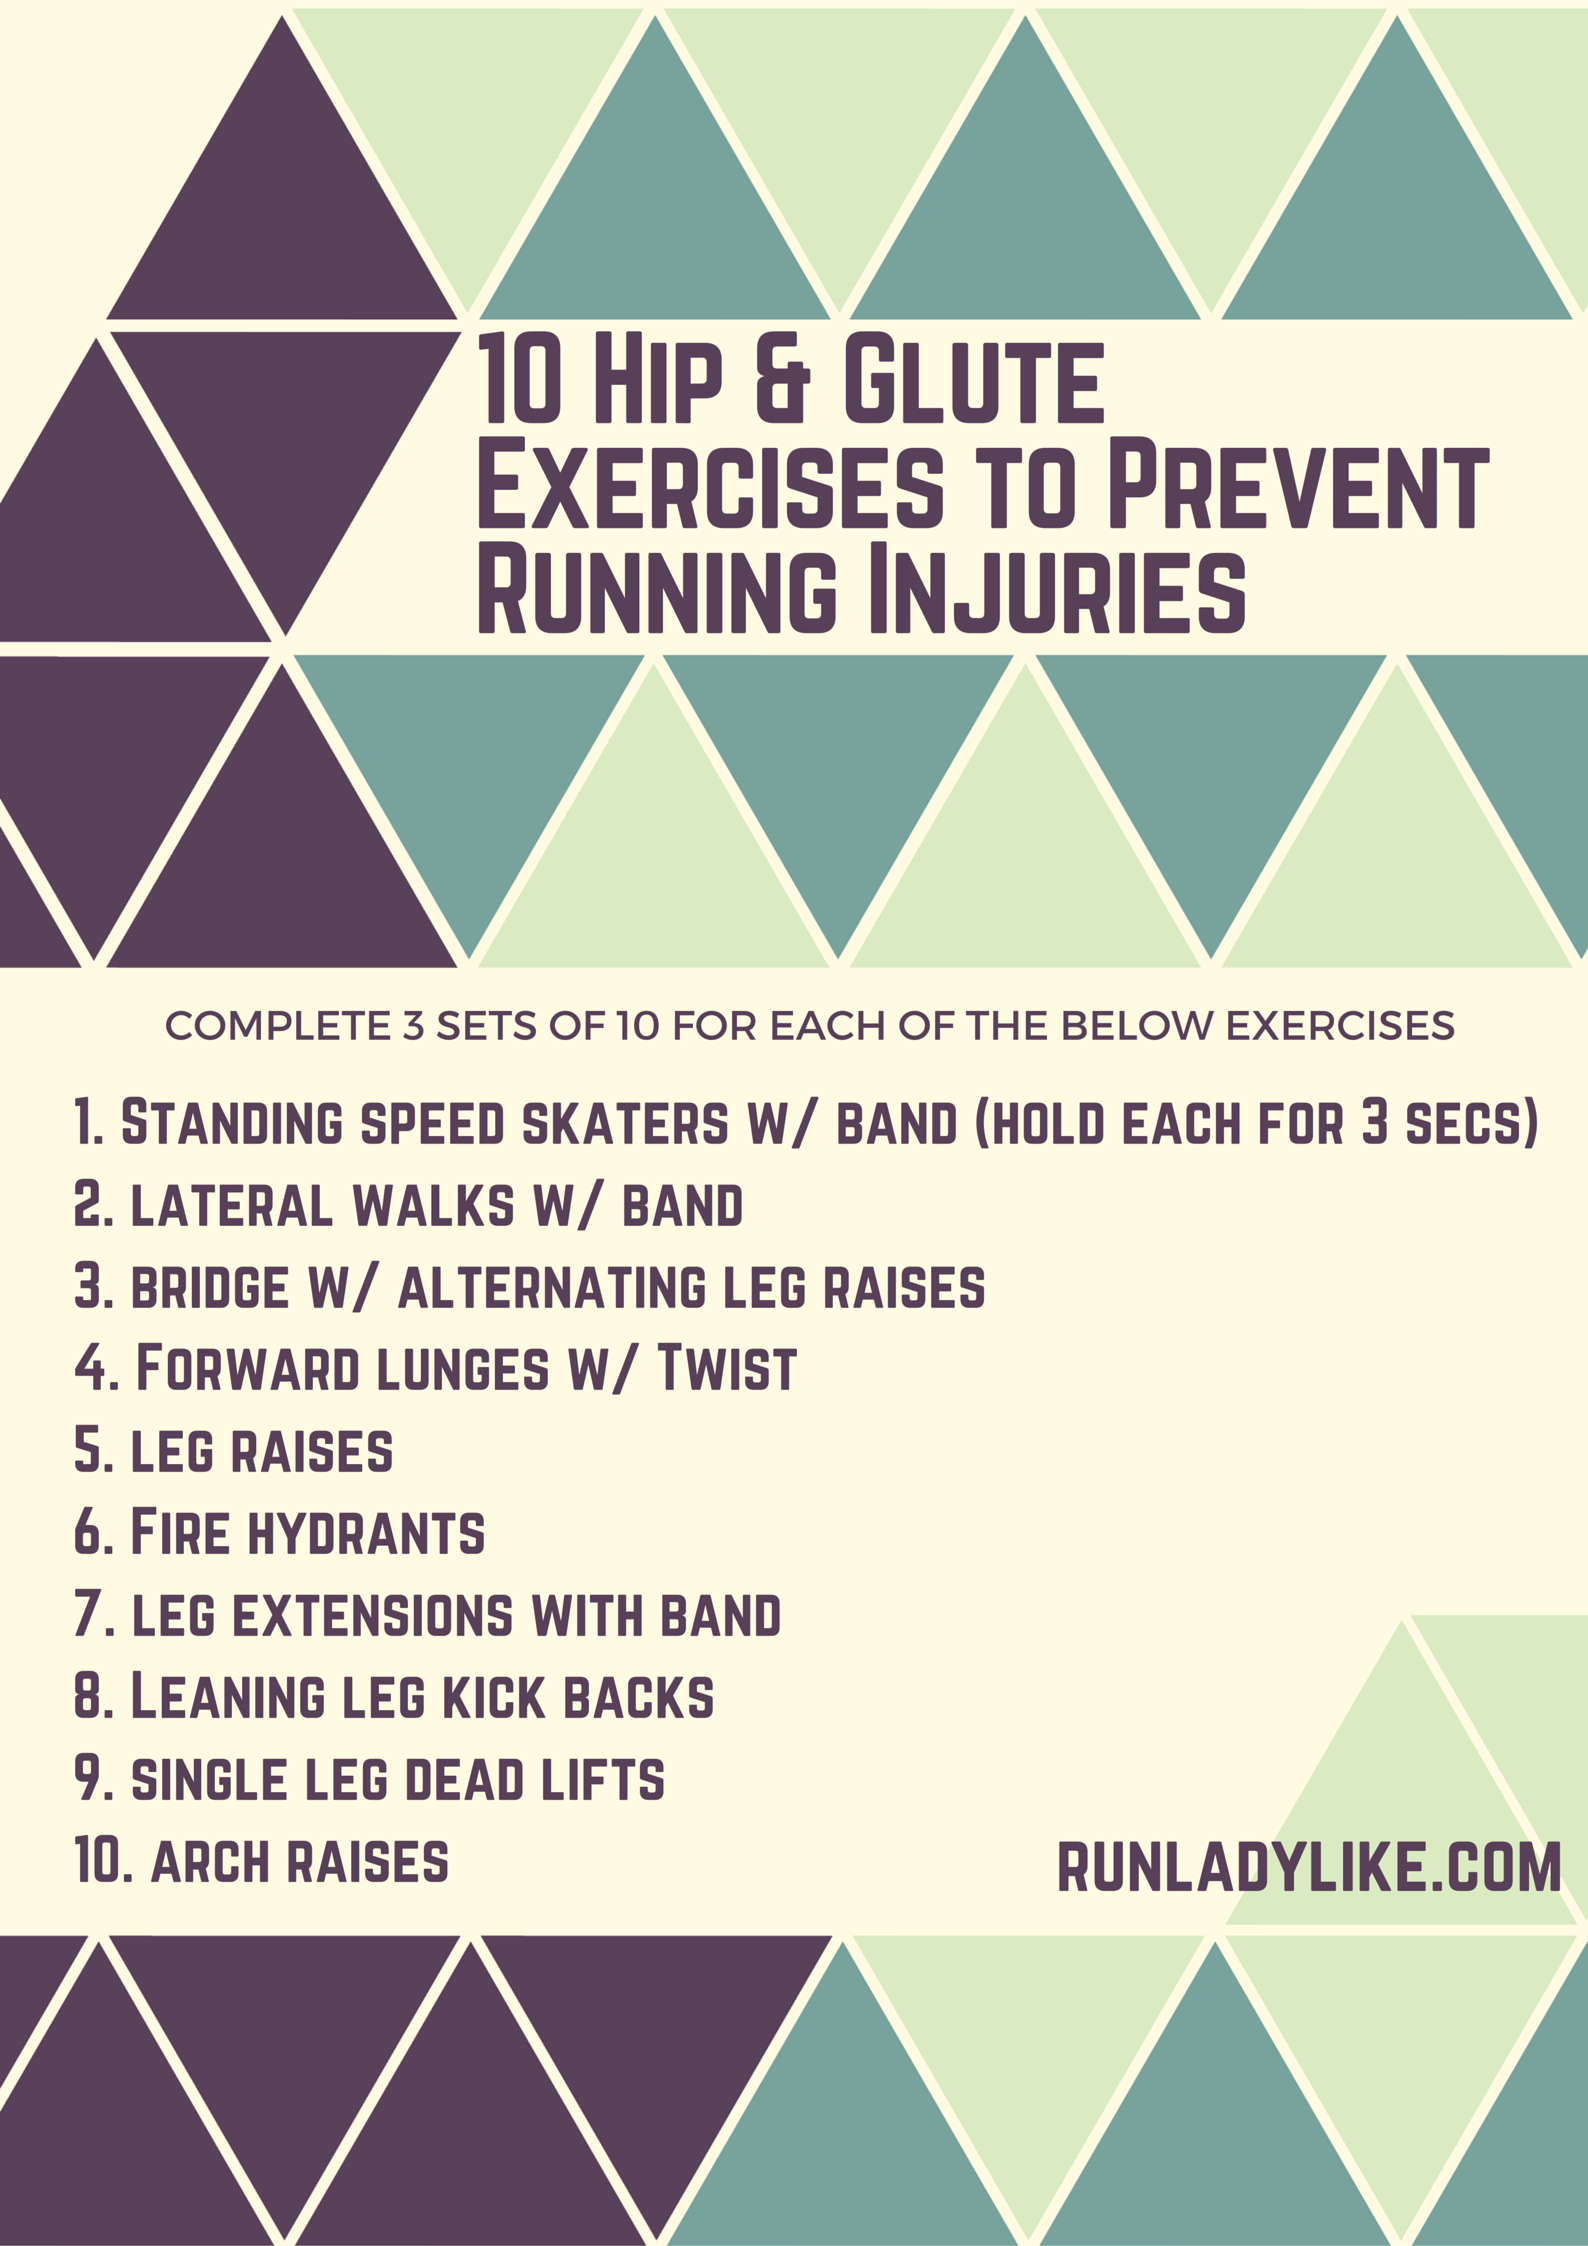 6 Iliotibial Band Syndrome Exercises for Runners to Kick the Pain